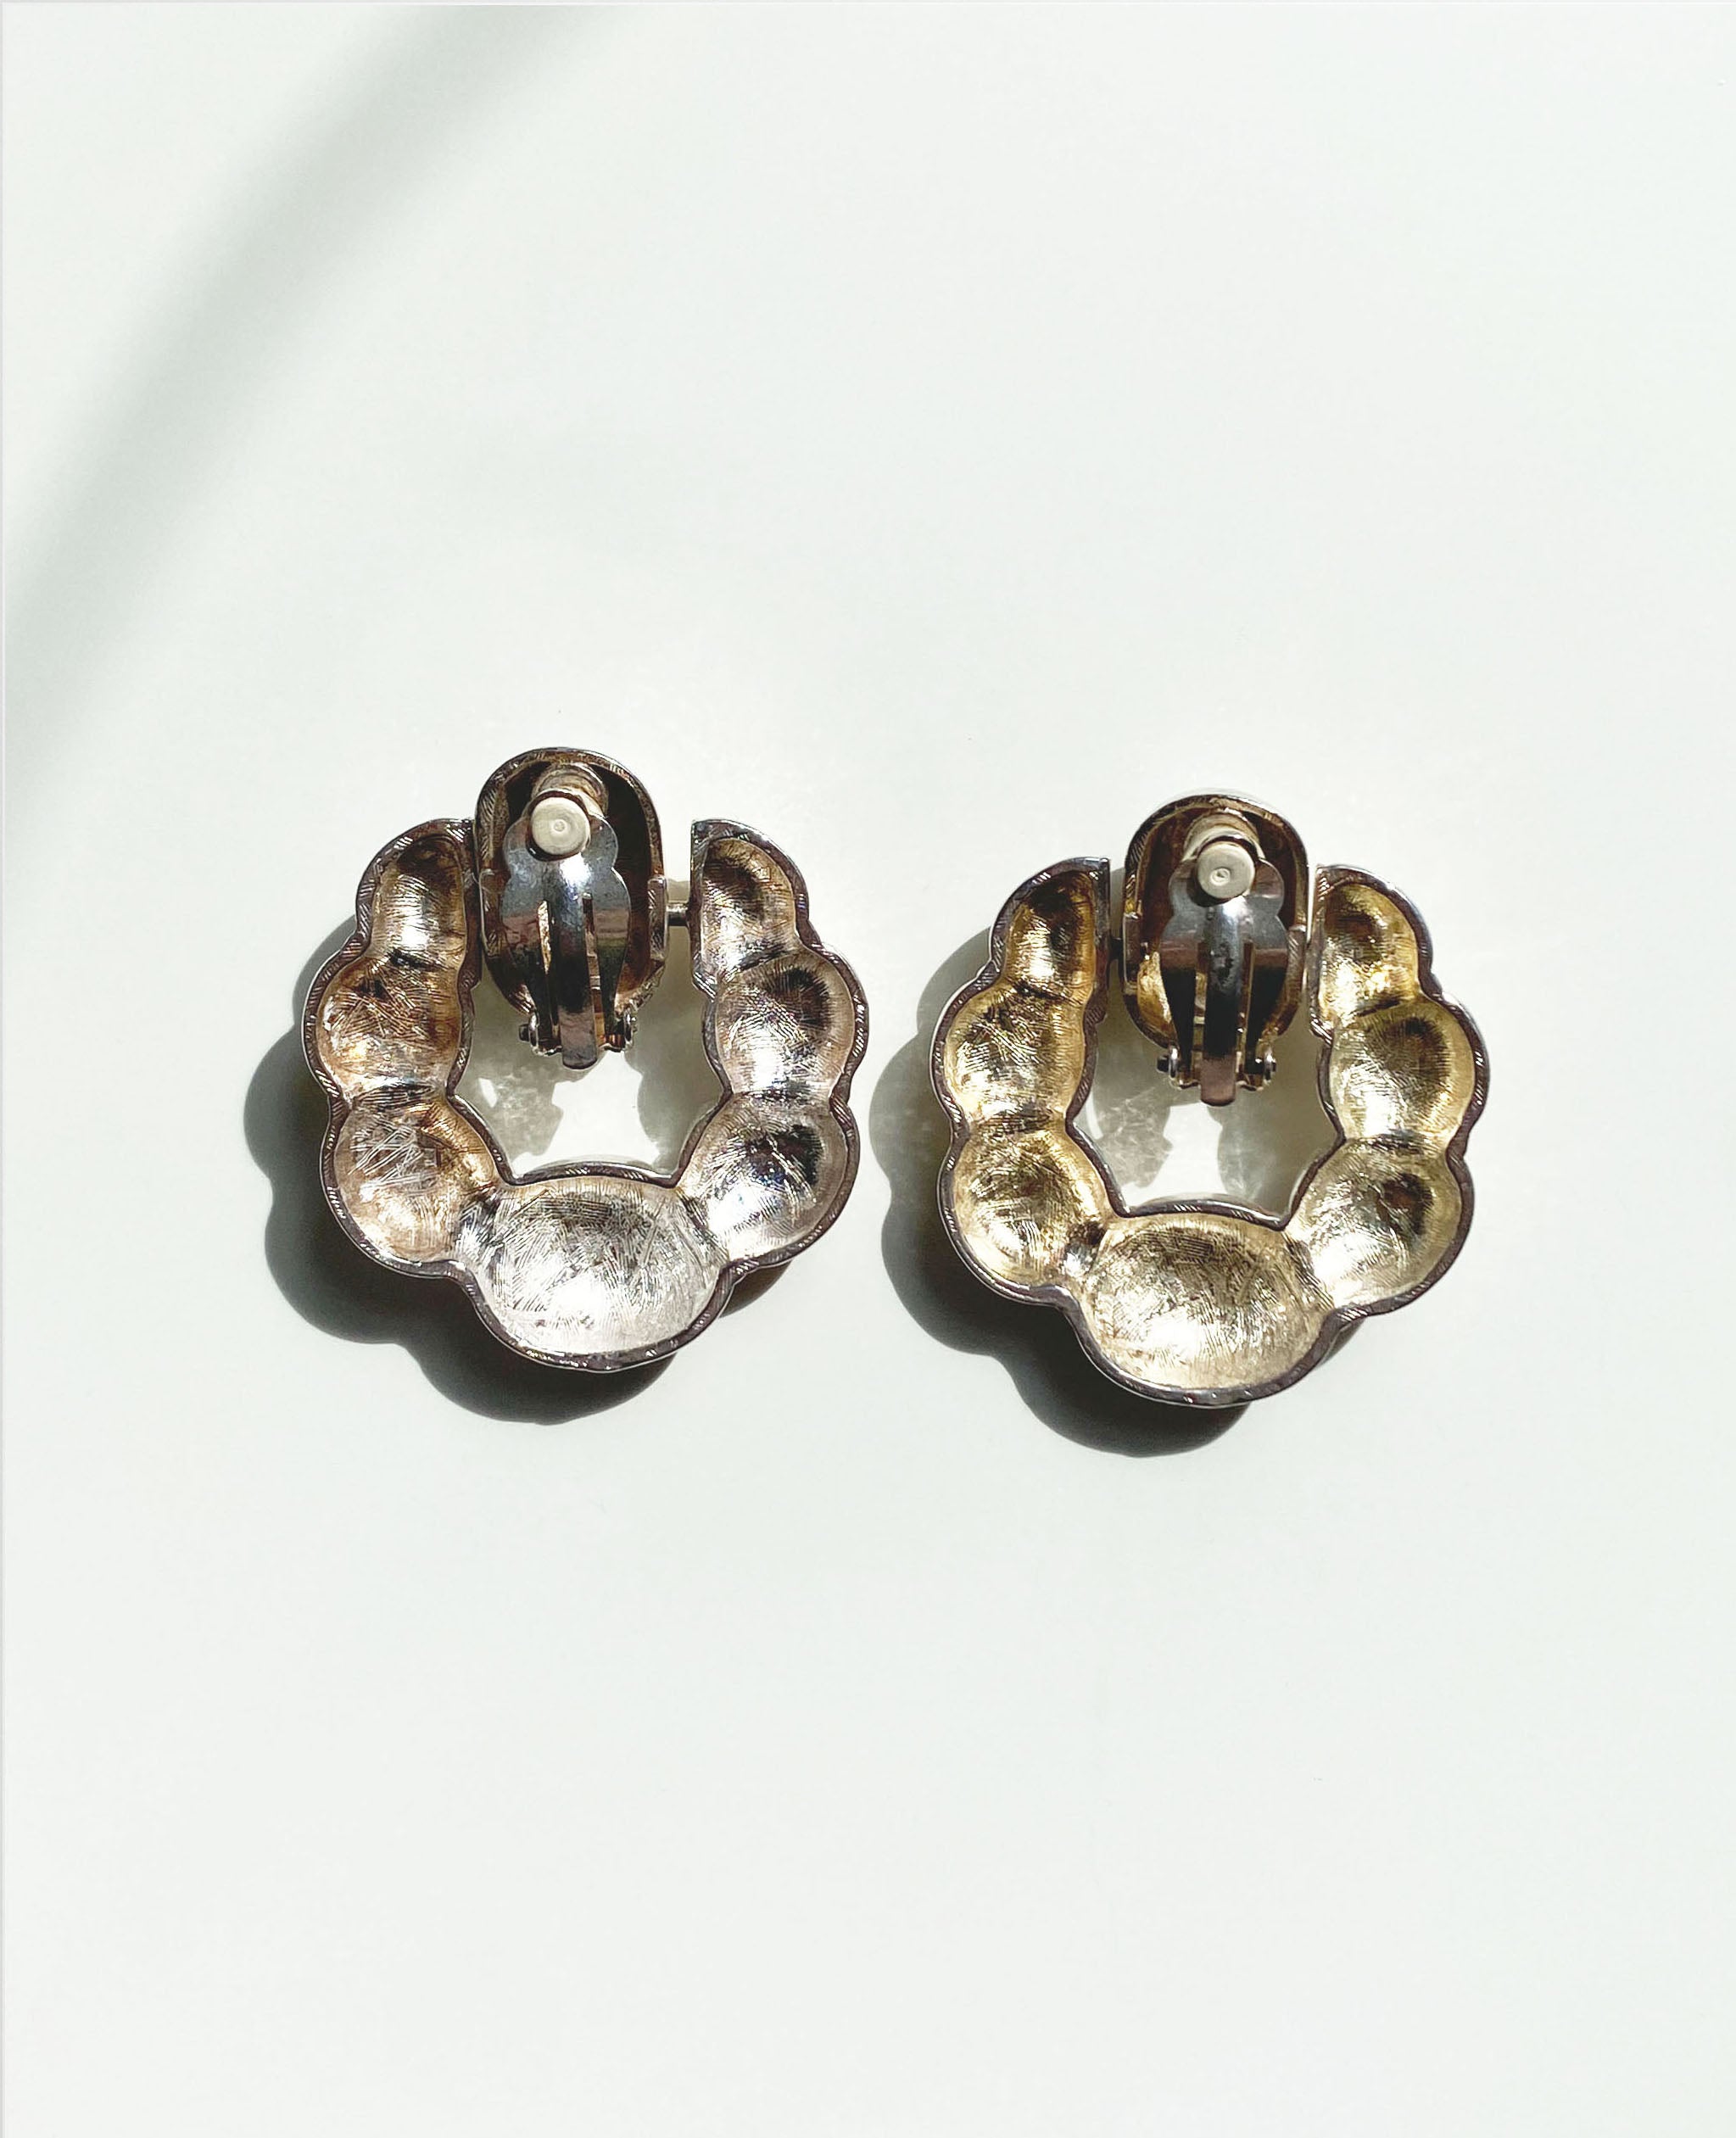 Puffy Ring Clip On Earrings